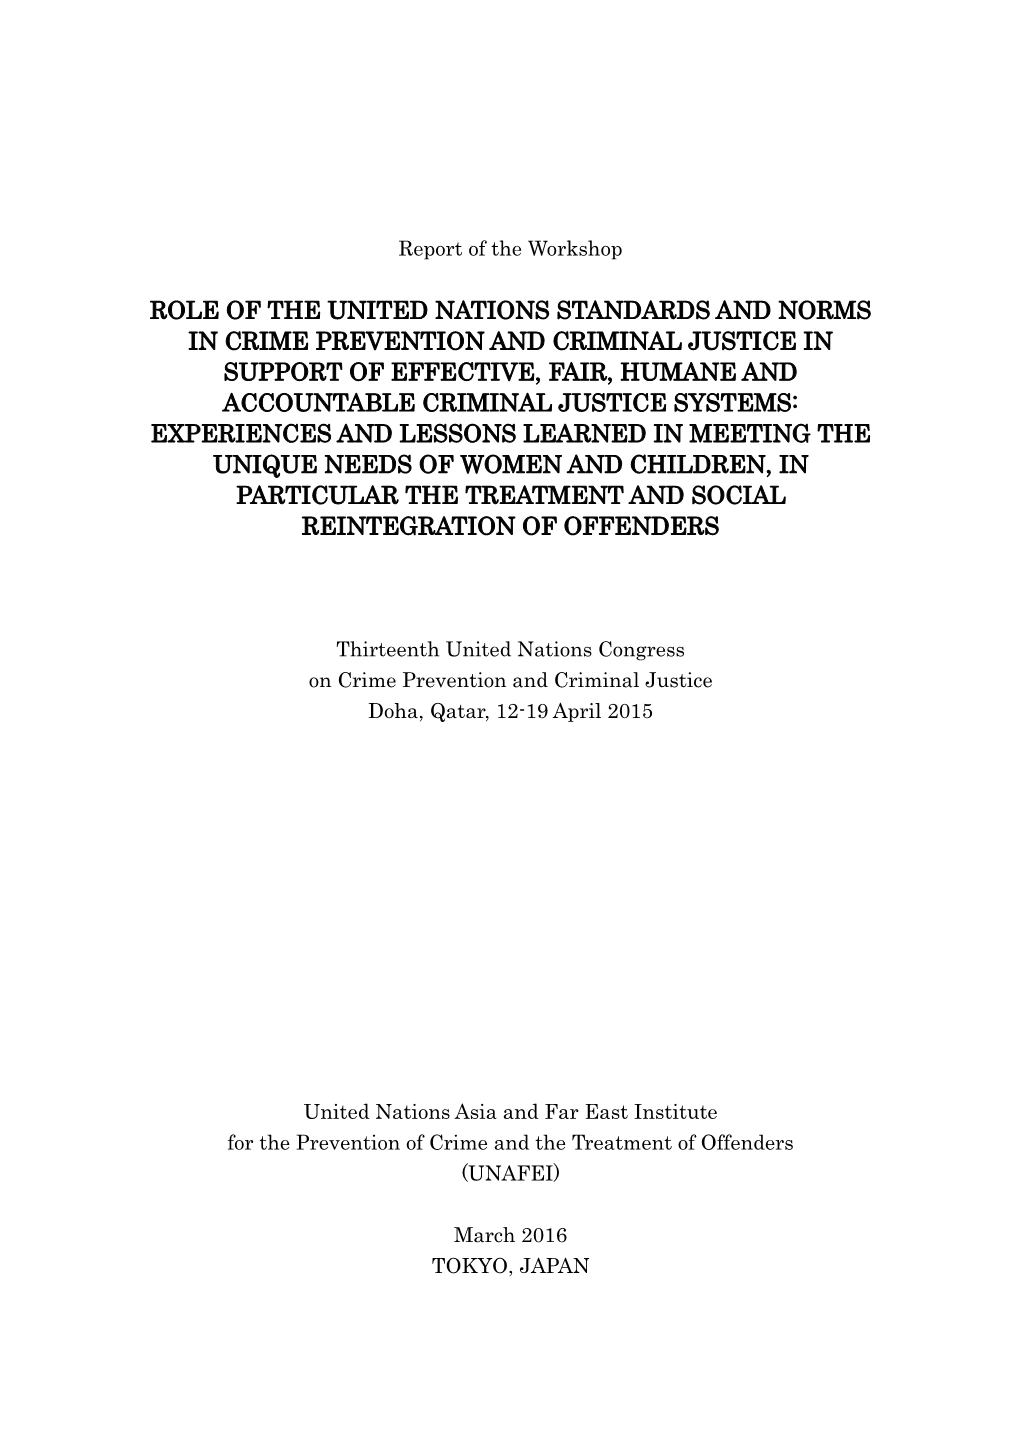 Role of the United Nations Standards and Norms In